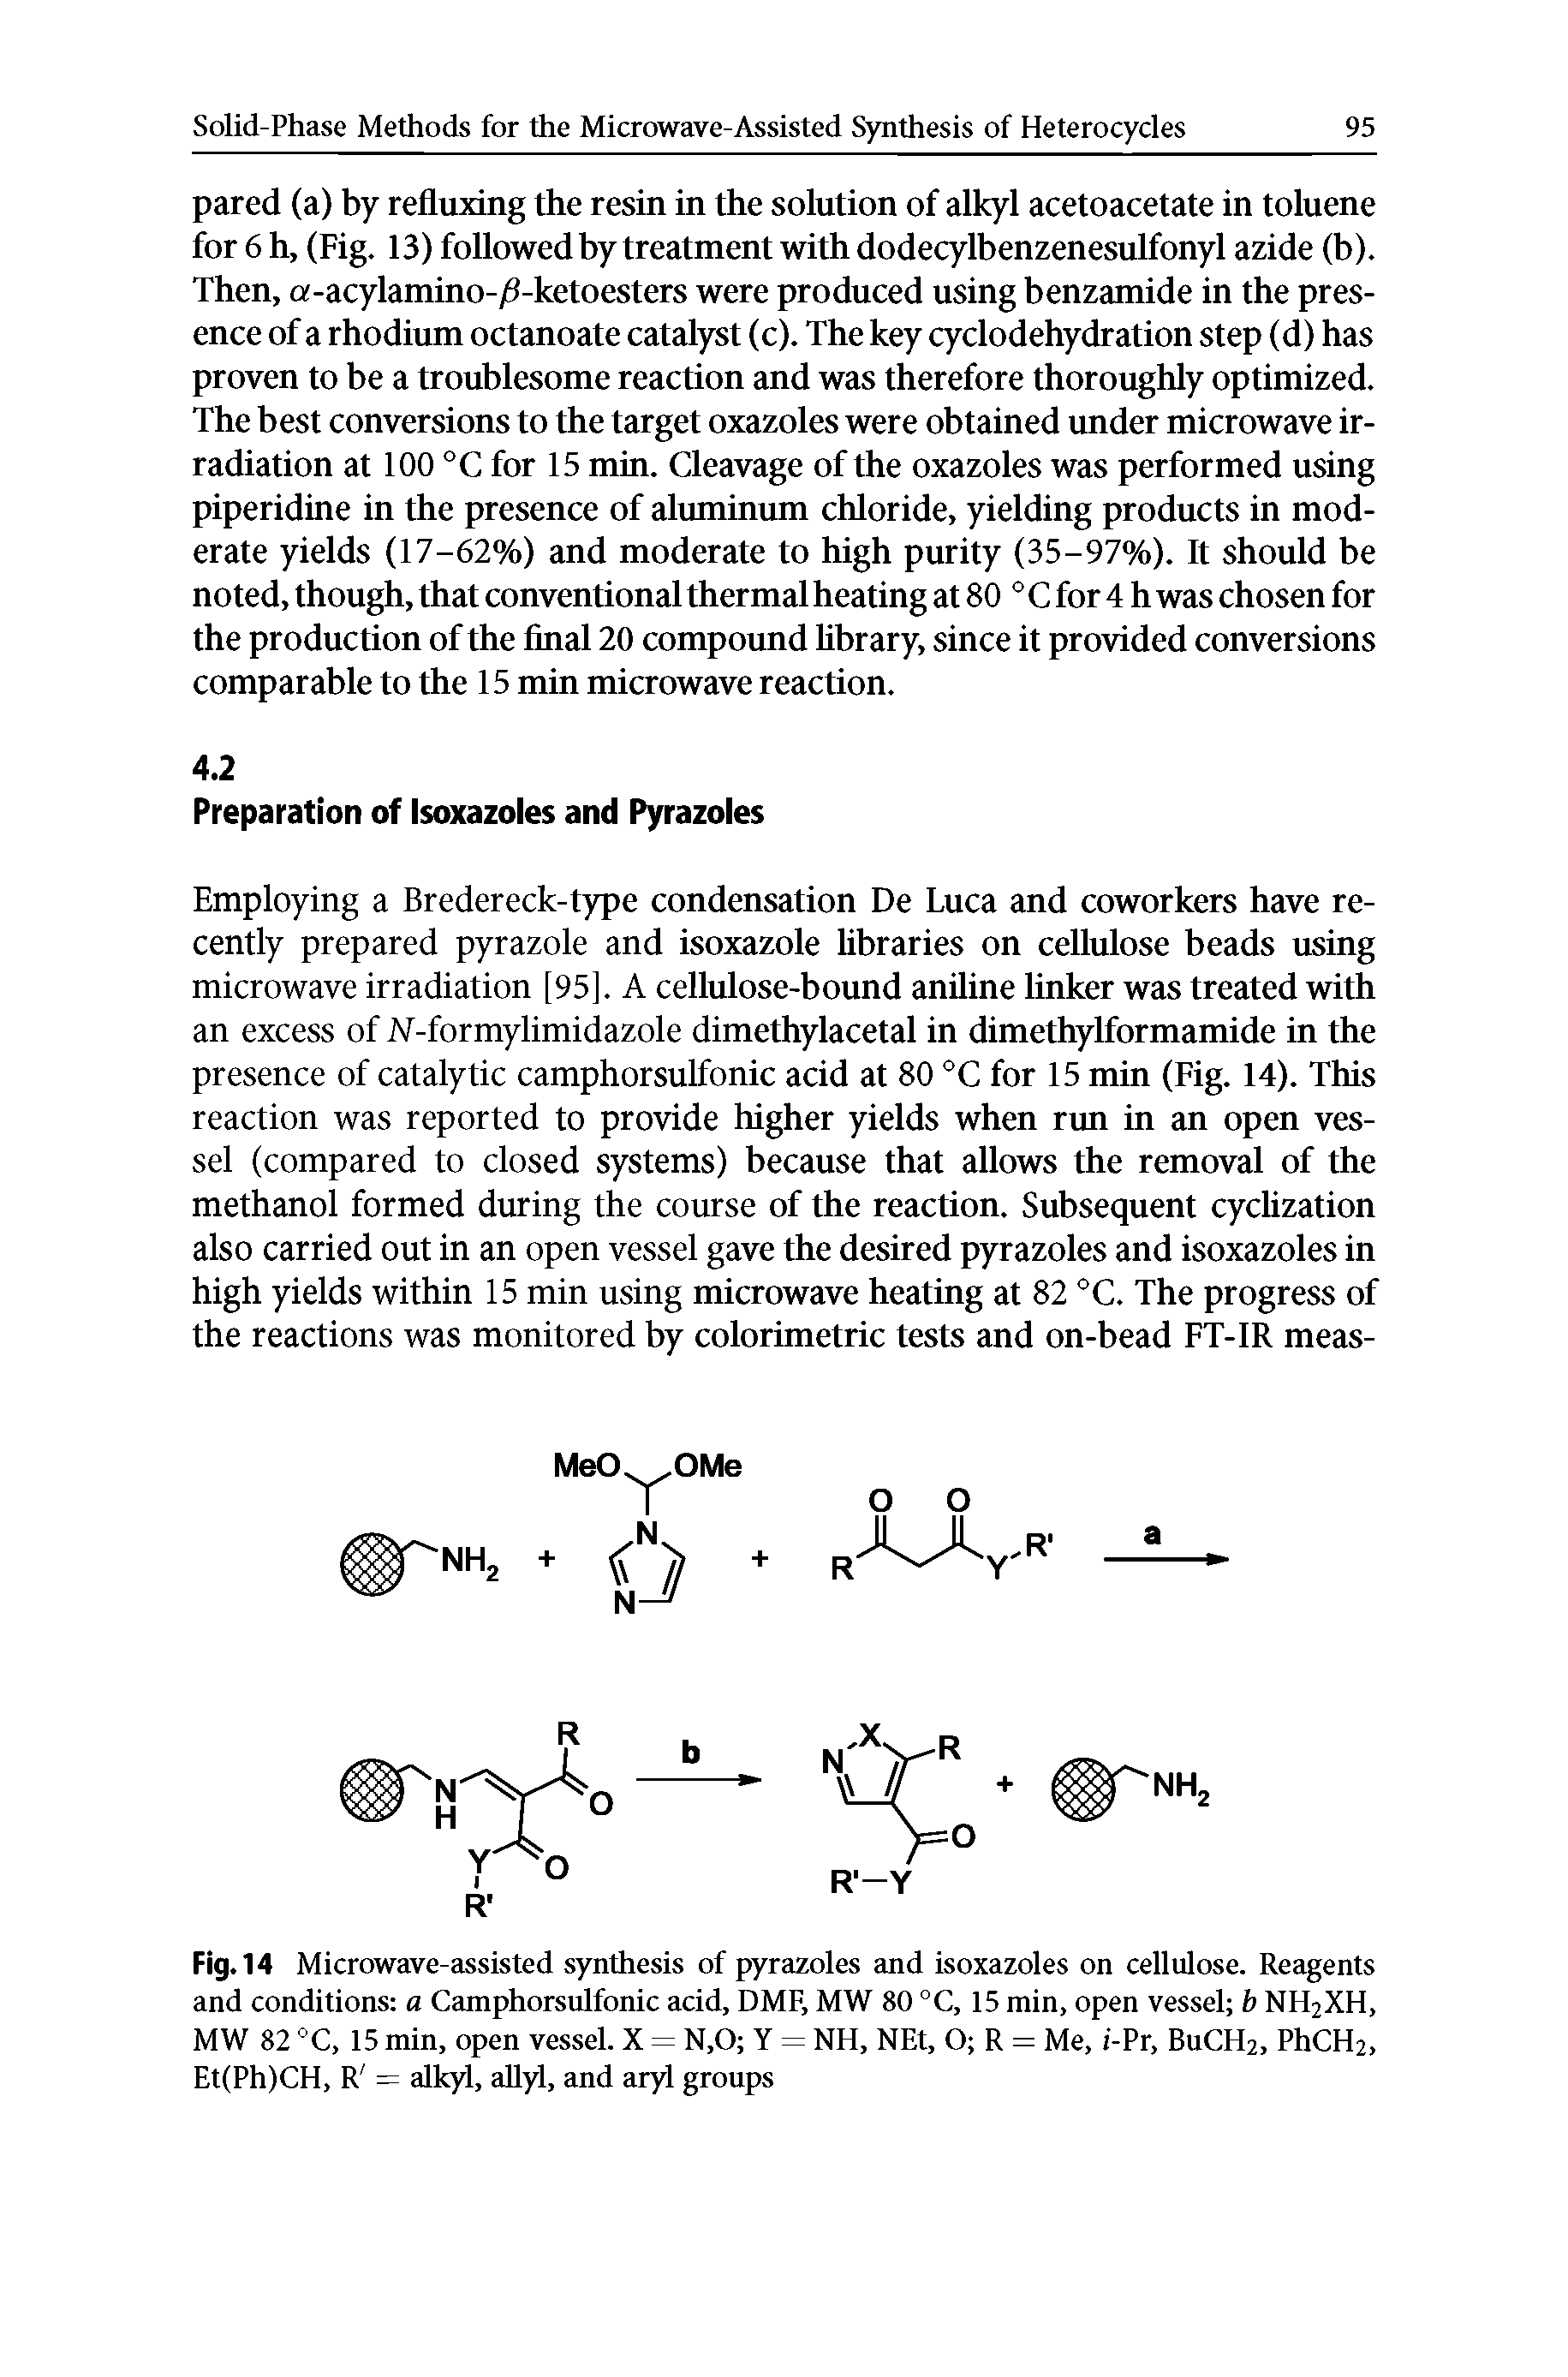 Fig. 14 Microwave-assisted synthesis of pyrazoles and isoxazoles on cellulose. Reagents and conditions a Camphorsulfonic acid, DMF, MW 80 °C, 15 min, open vessel b NH2XH, MW 82 °C, 15 min, open vessel. X = N,0 Y = NH, NEt, O R = Me, i-Pr, BUCH2, PhCH2, Et(Ph)CH, R = alkyl, aUyl, and aryl groups...